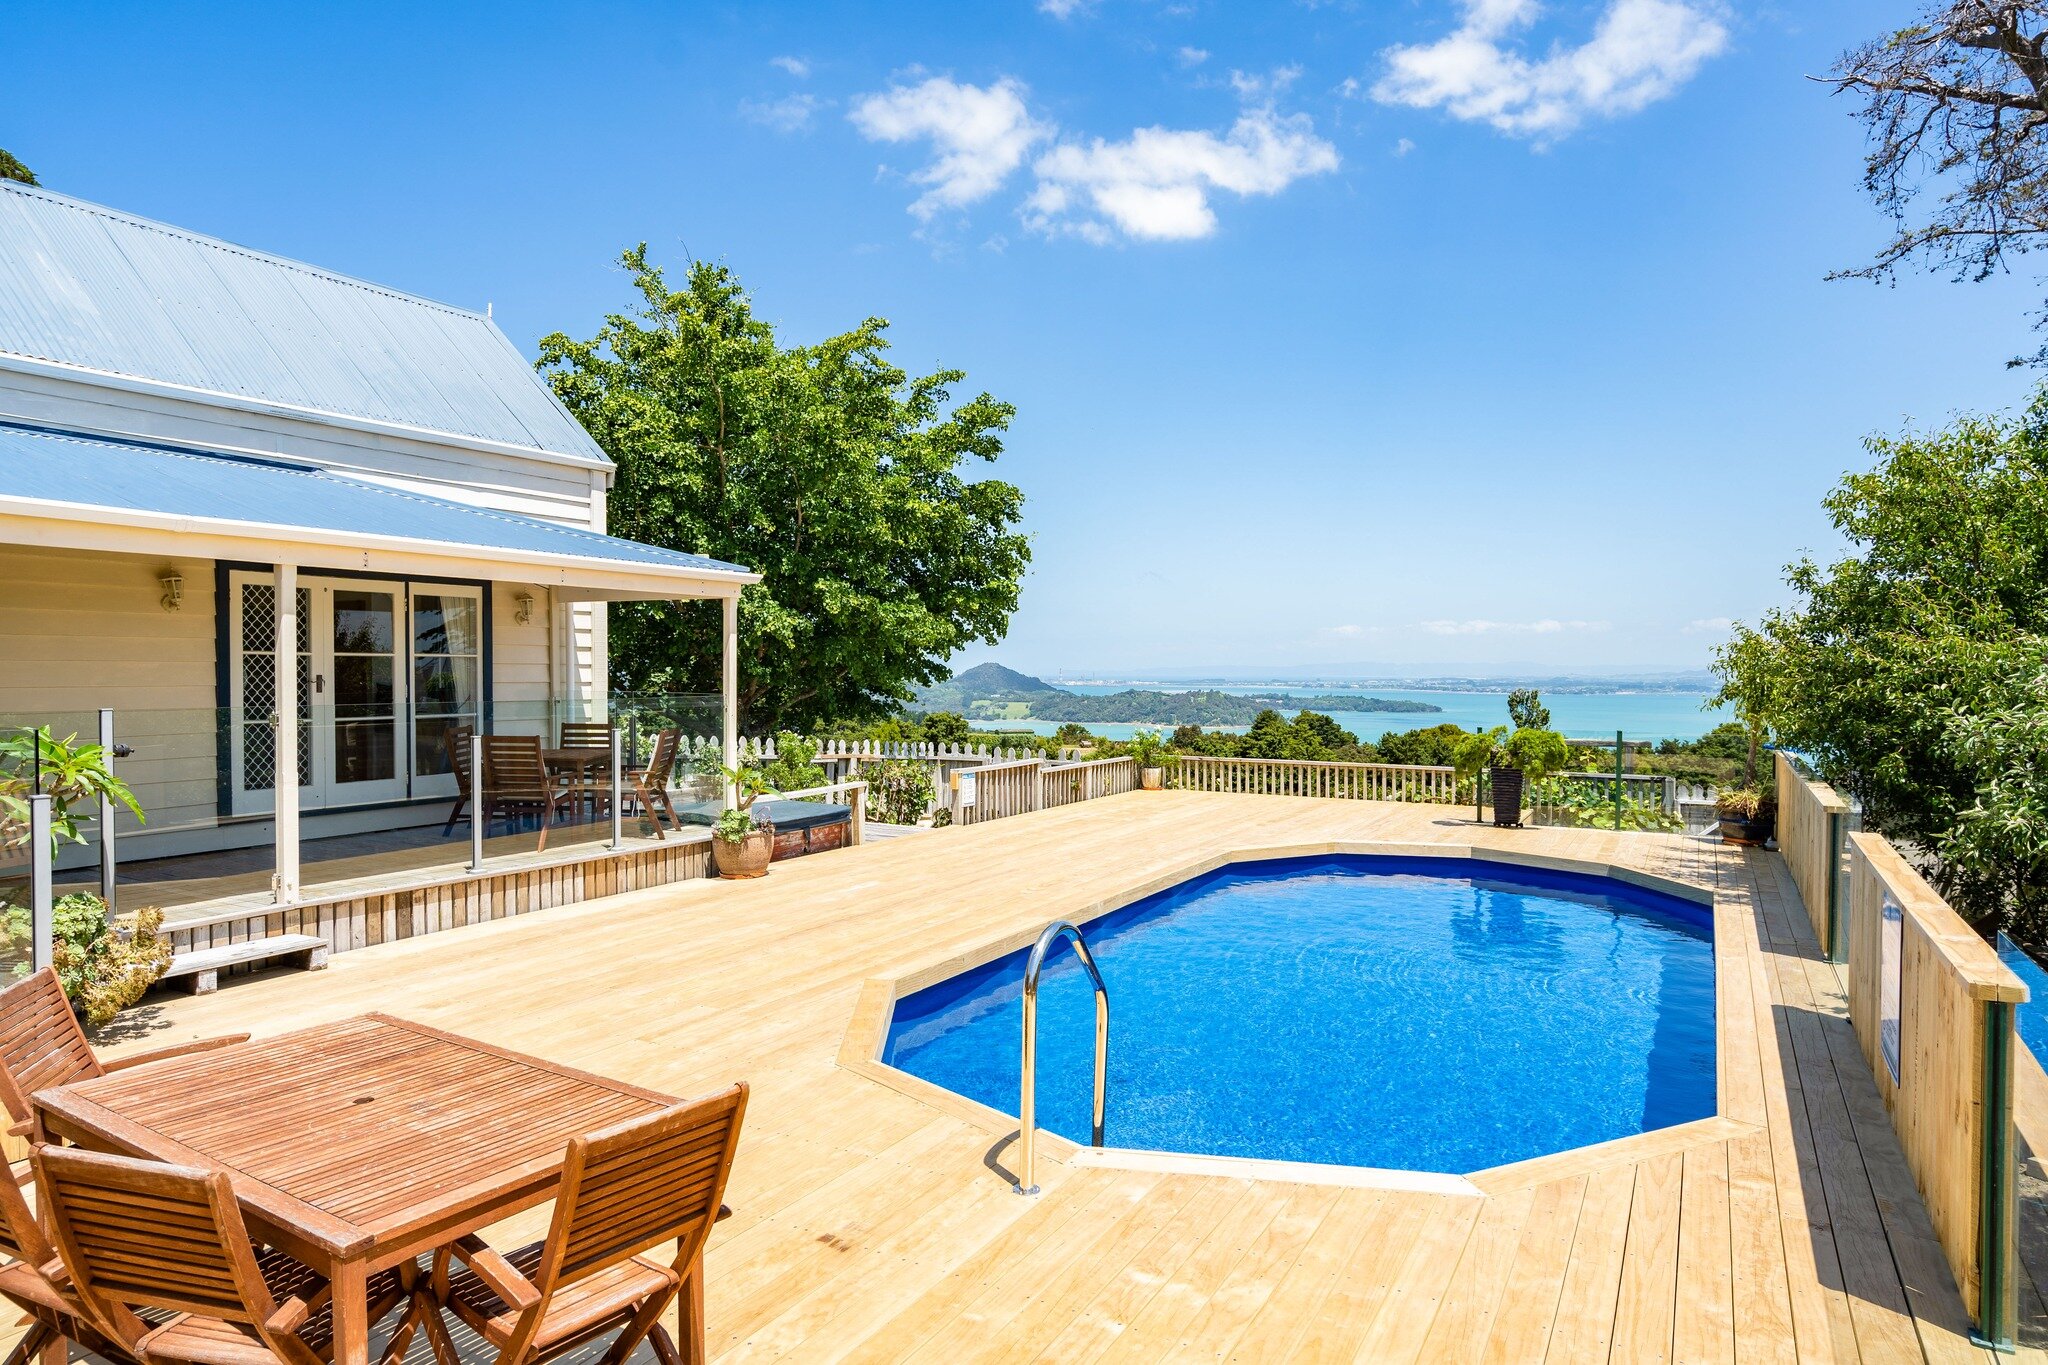 Pool and a view: double paradise in real estate! 
.
.
.
.
.
.
.
#realestatephotography #realestatenz #property 
#newzealand #nz #summer #beautiful #weather 
#instagram #northland #whangarei #realestateagent 
#videocreator #cinematography #photographe